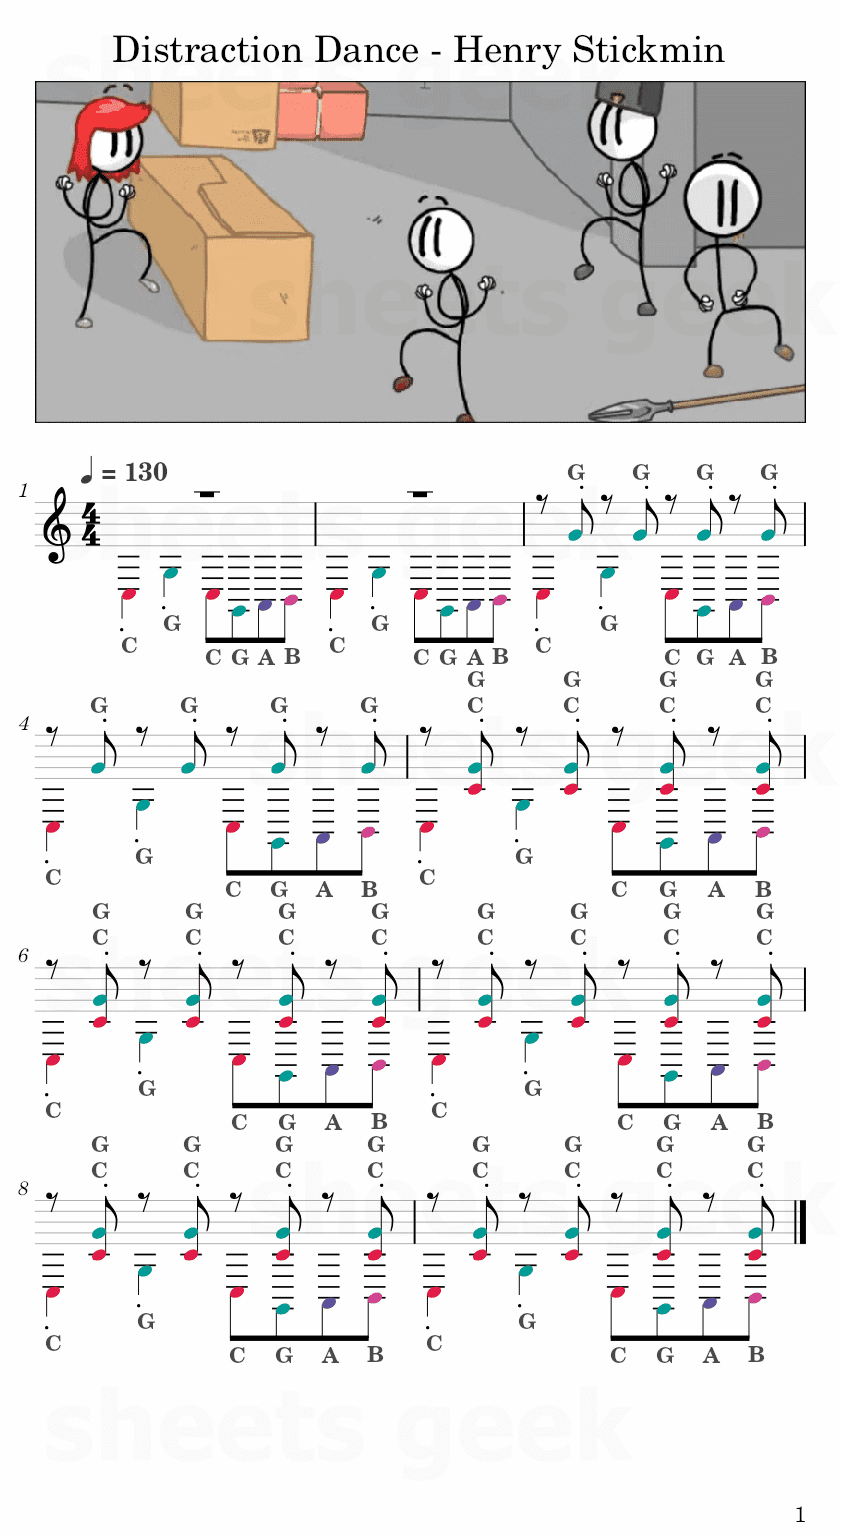 Distraction Dance - Henry Stickmin Easy Sheet Music Free for piano, keyboard, flute, violin, sax, cello page 1